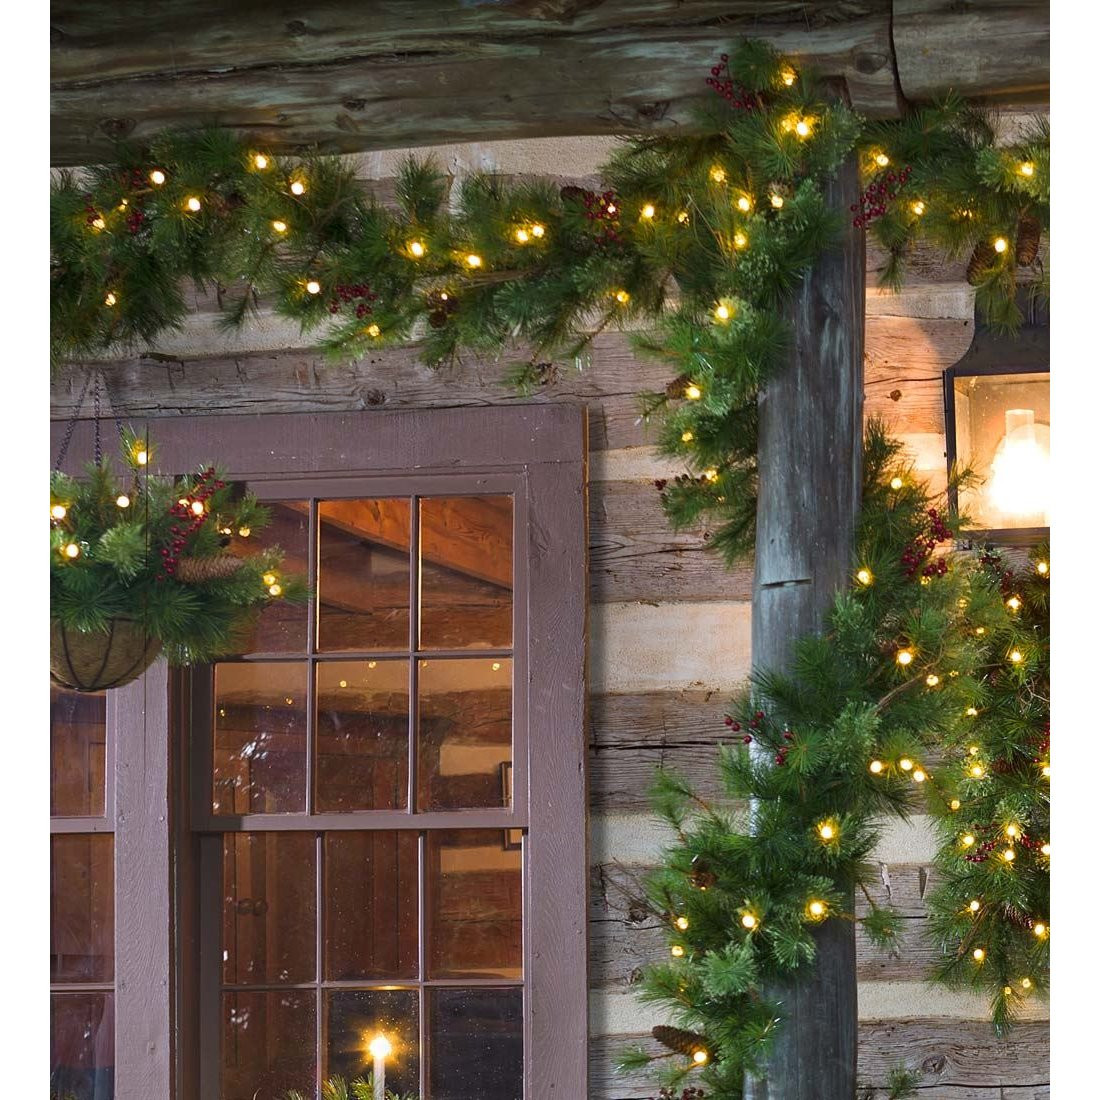 Outdoor Christmas Garland With Lights
 Plow & Hearth Lighted Outdoor Battery Operated Holiday